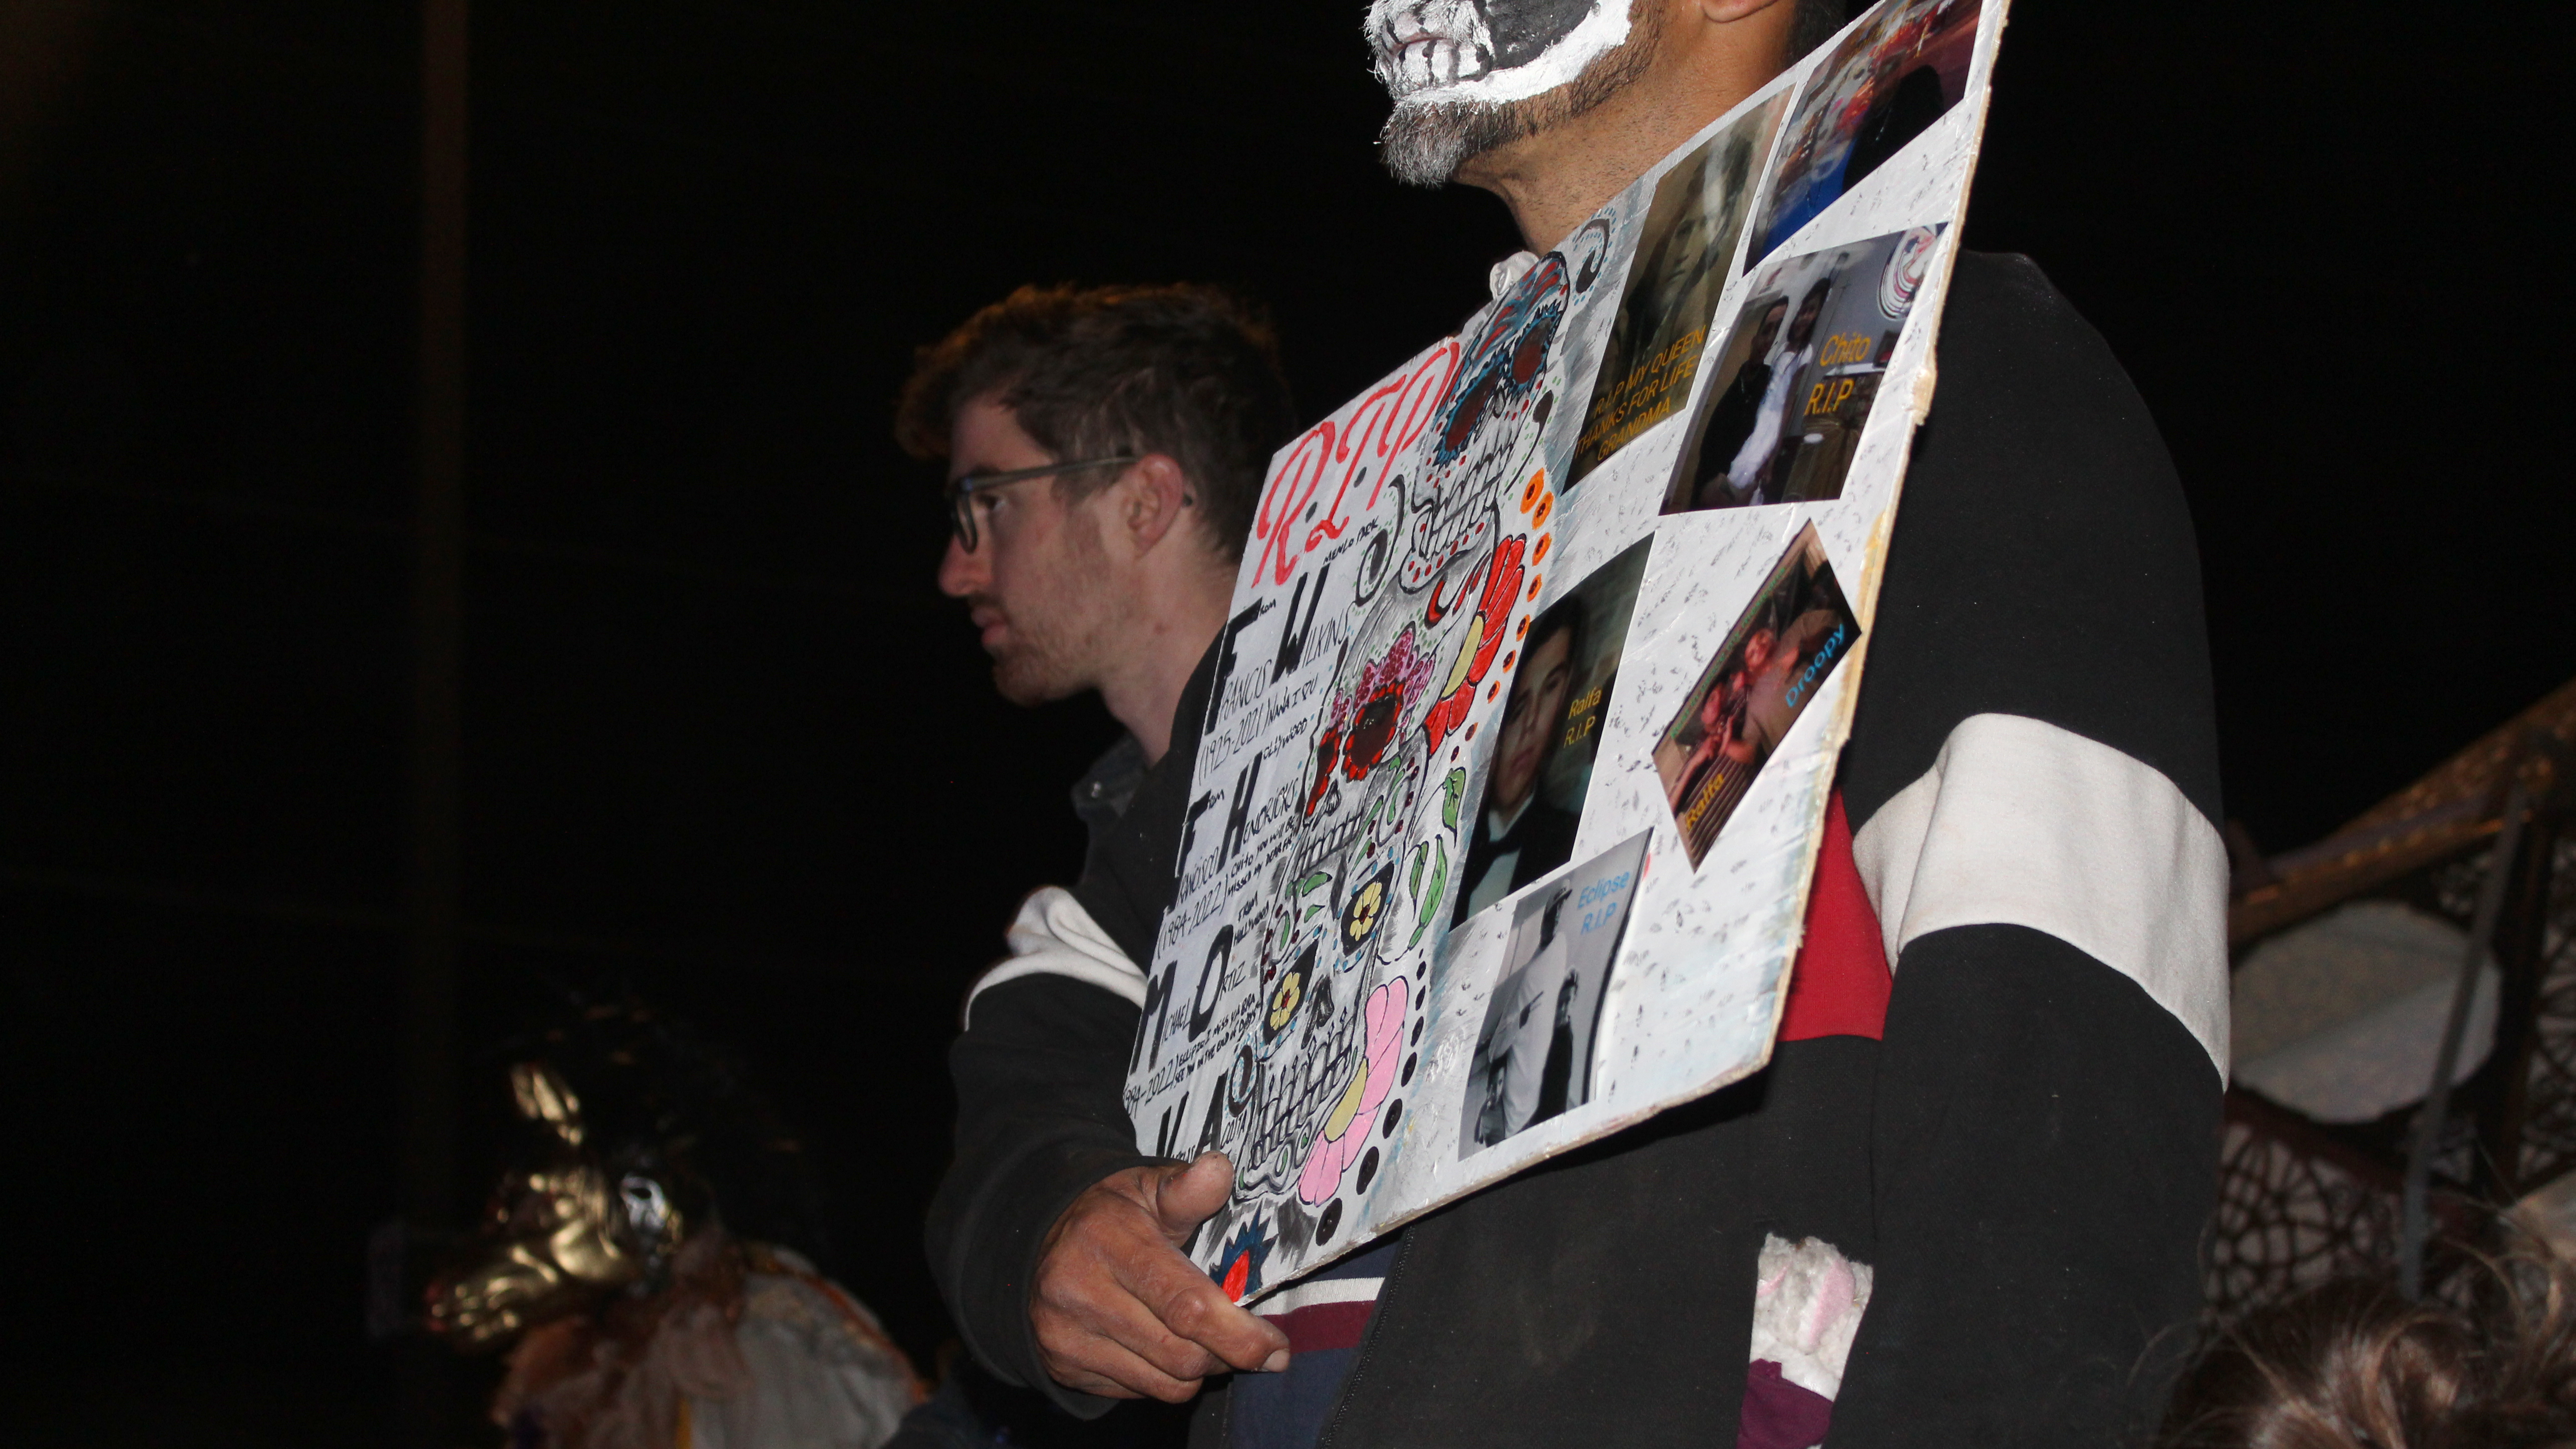 Many attendees made posters with pictures of their loved ones who passed away. 